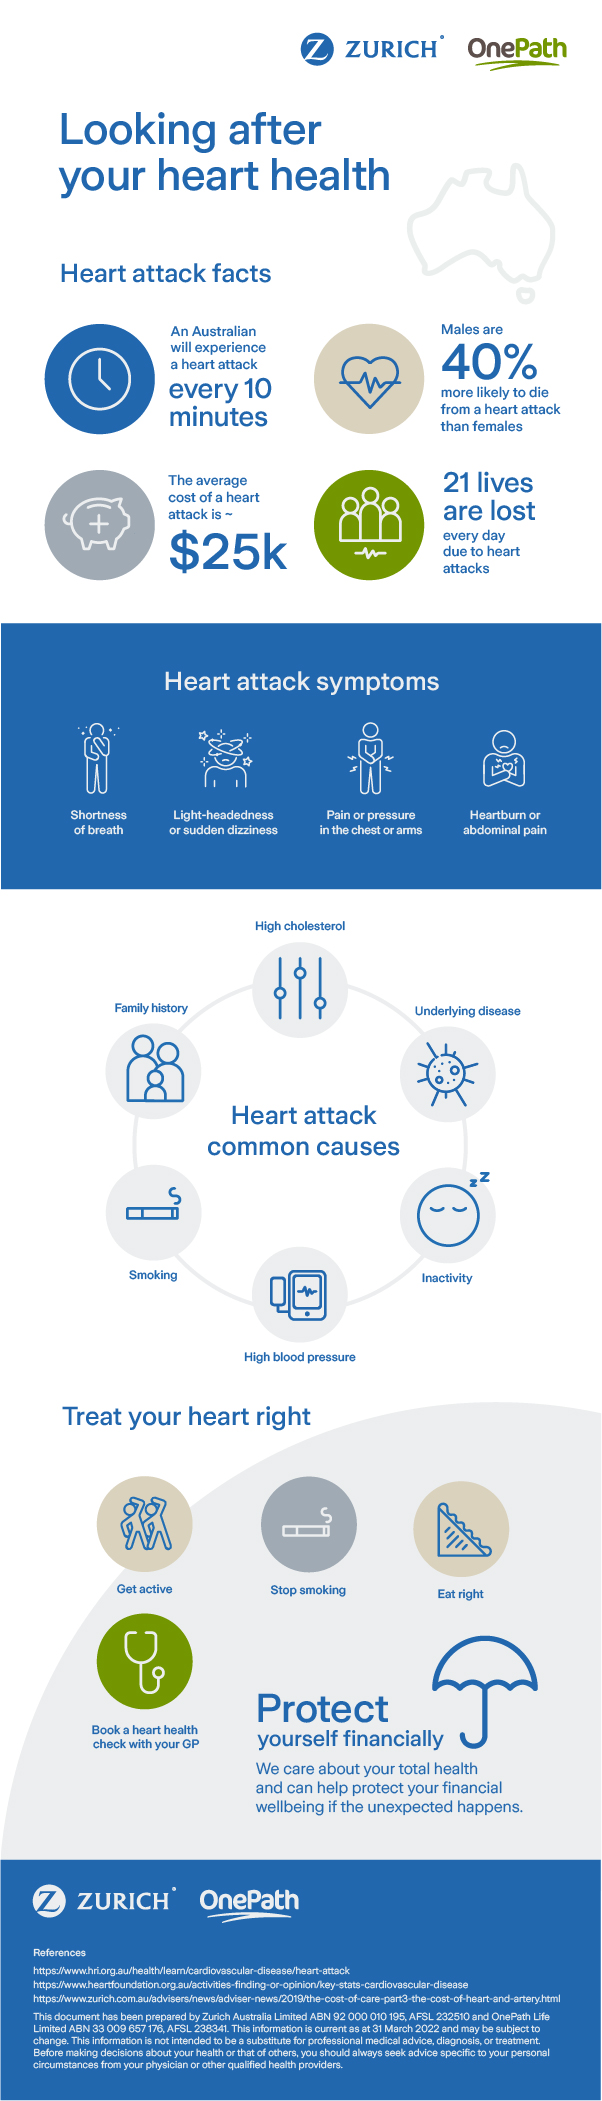 Looking after your heart health infographic